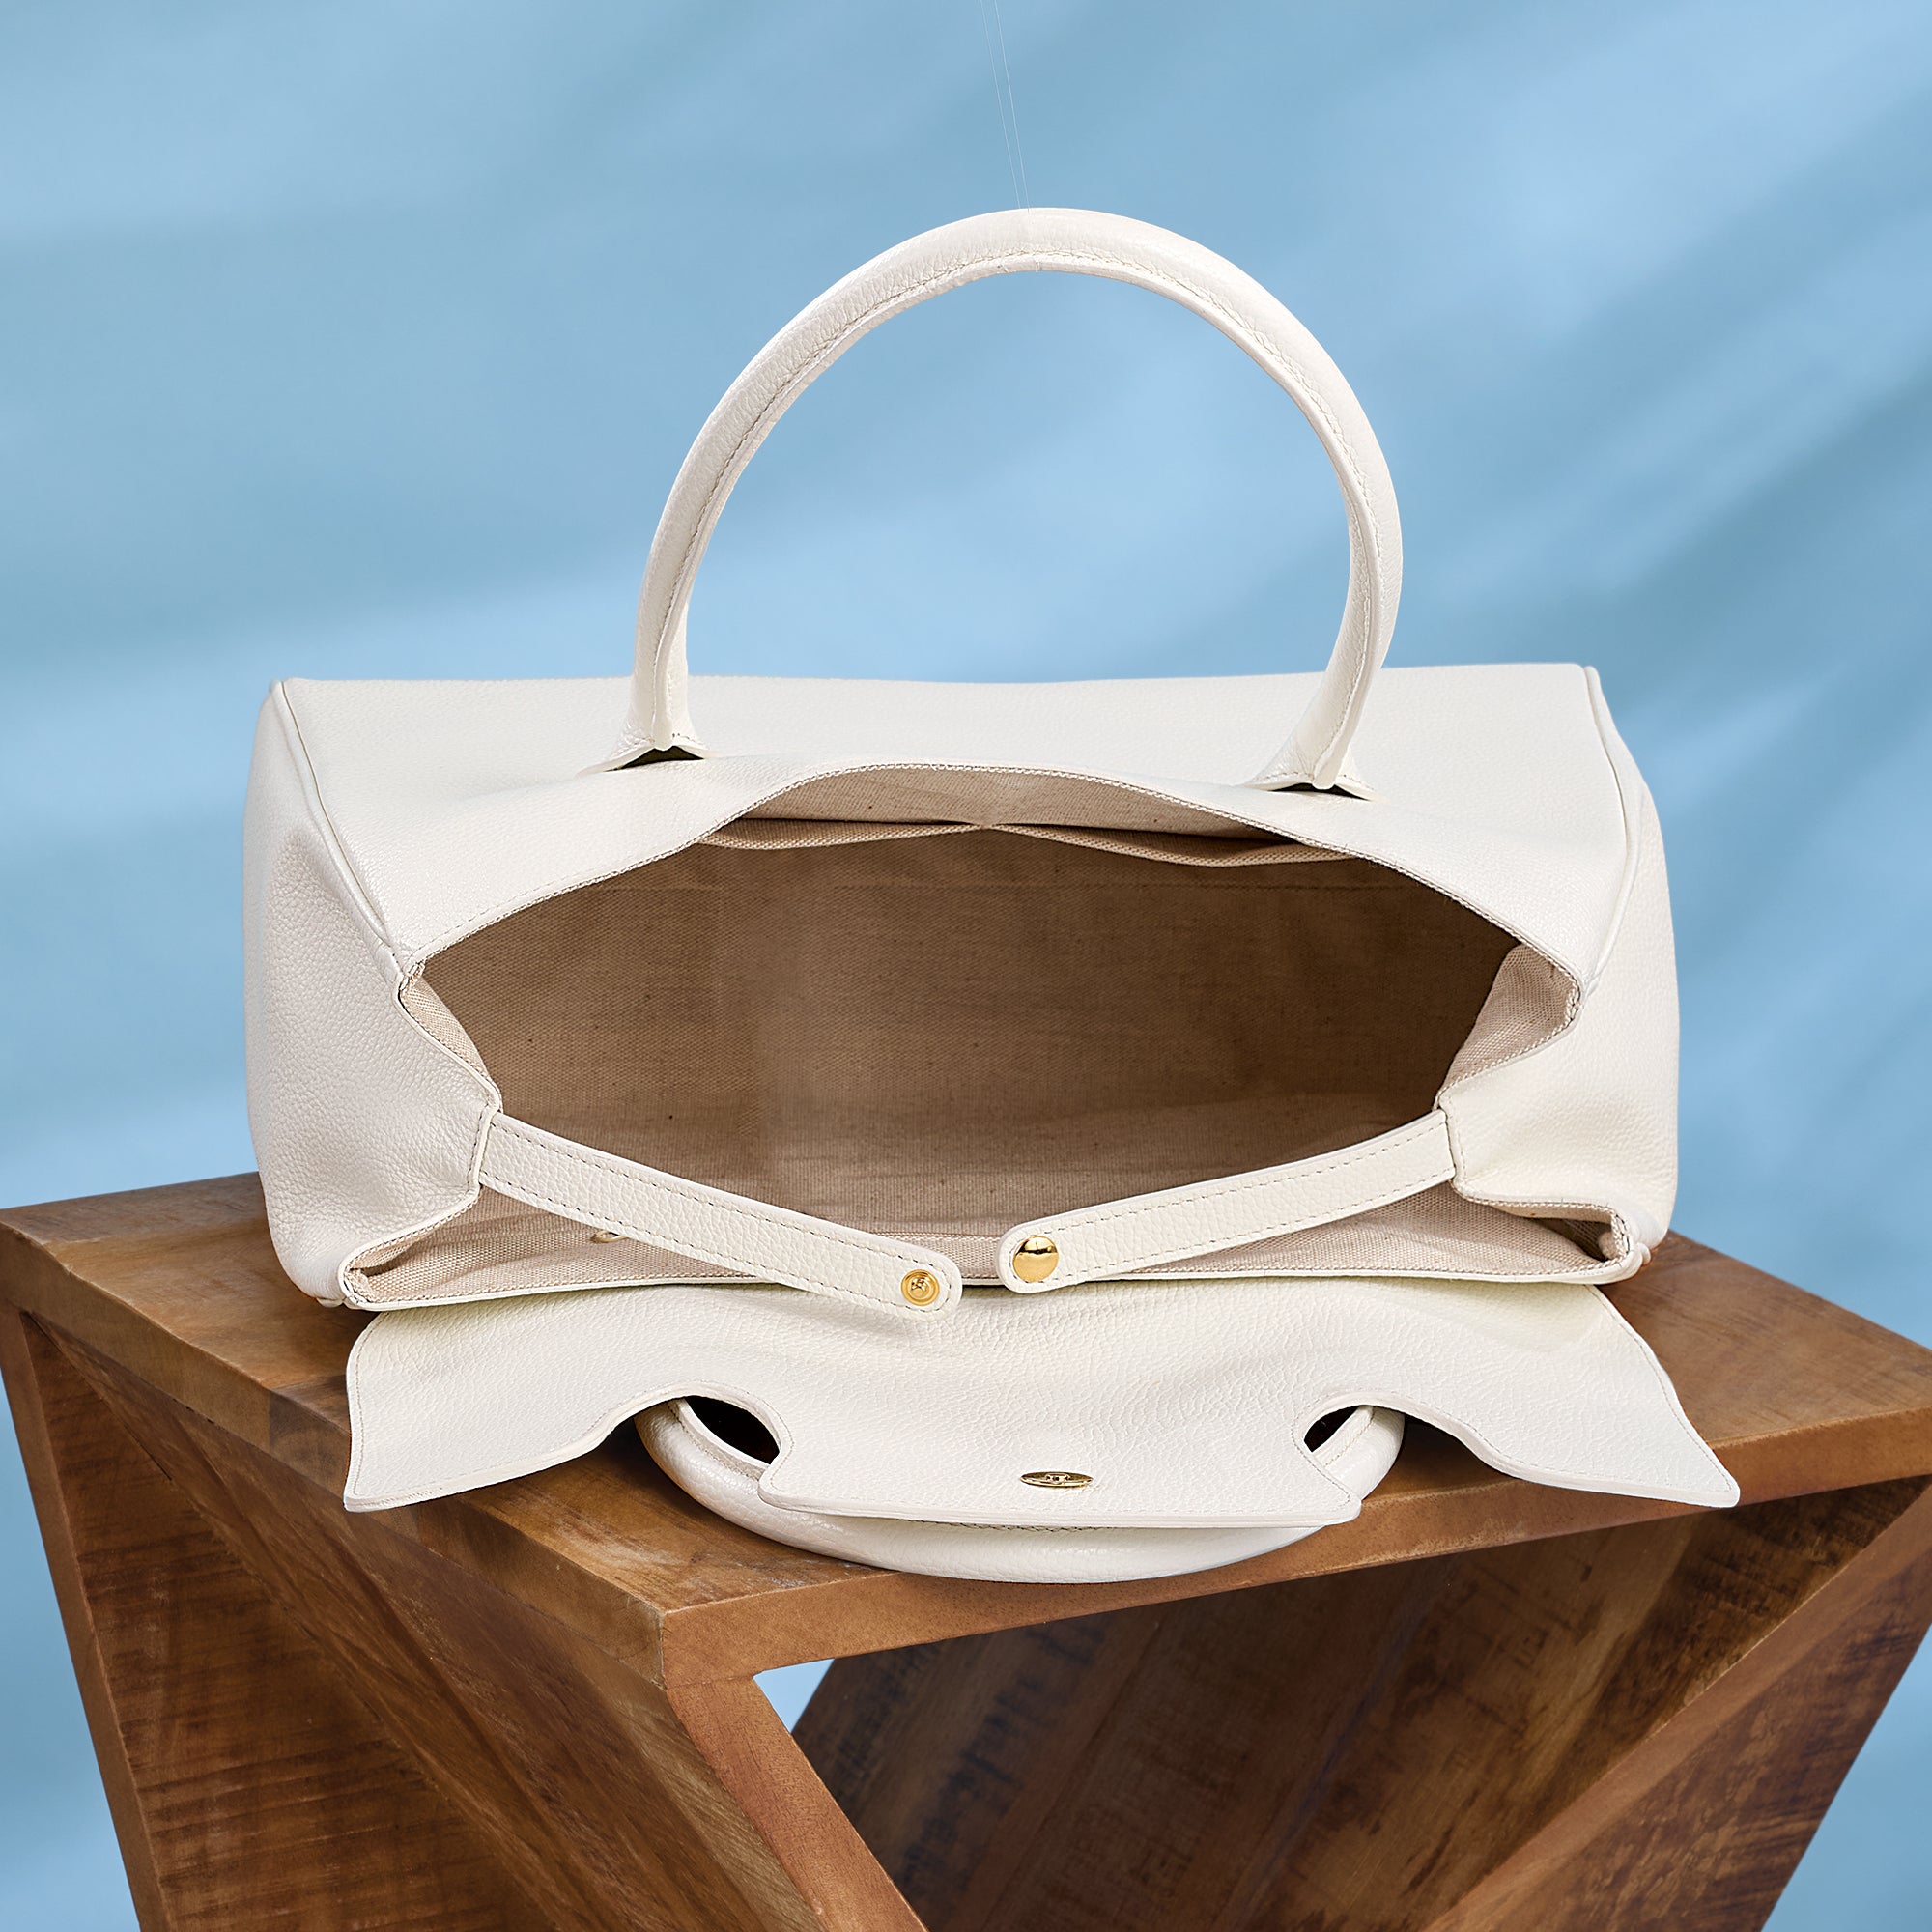 Ivory Florentine Leather Tote With Blue Apatite Accent